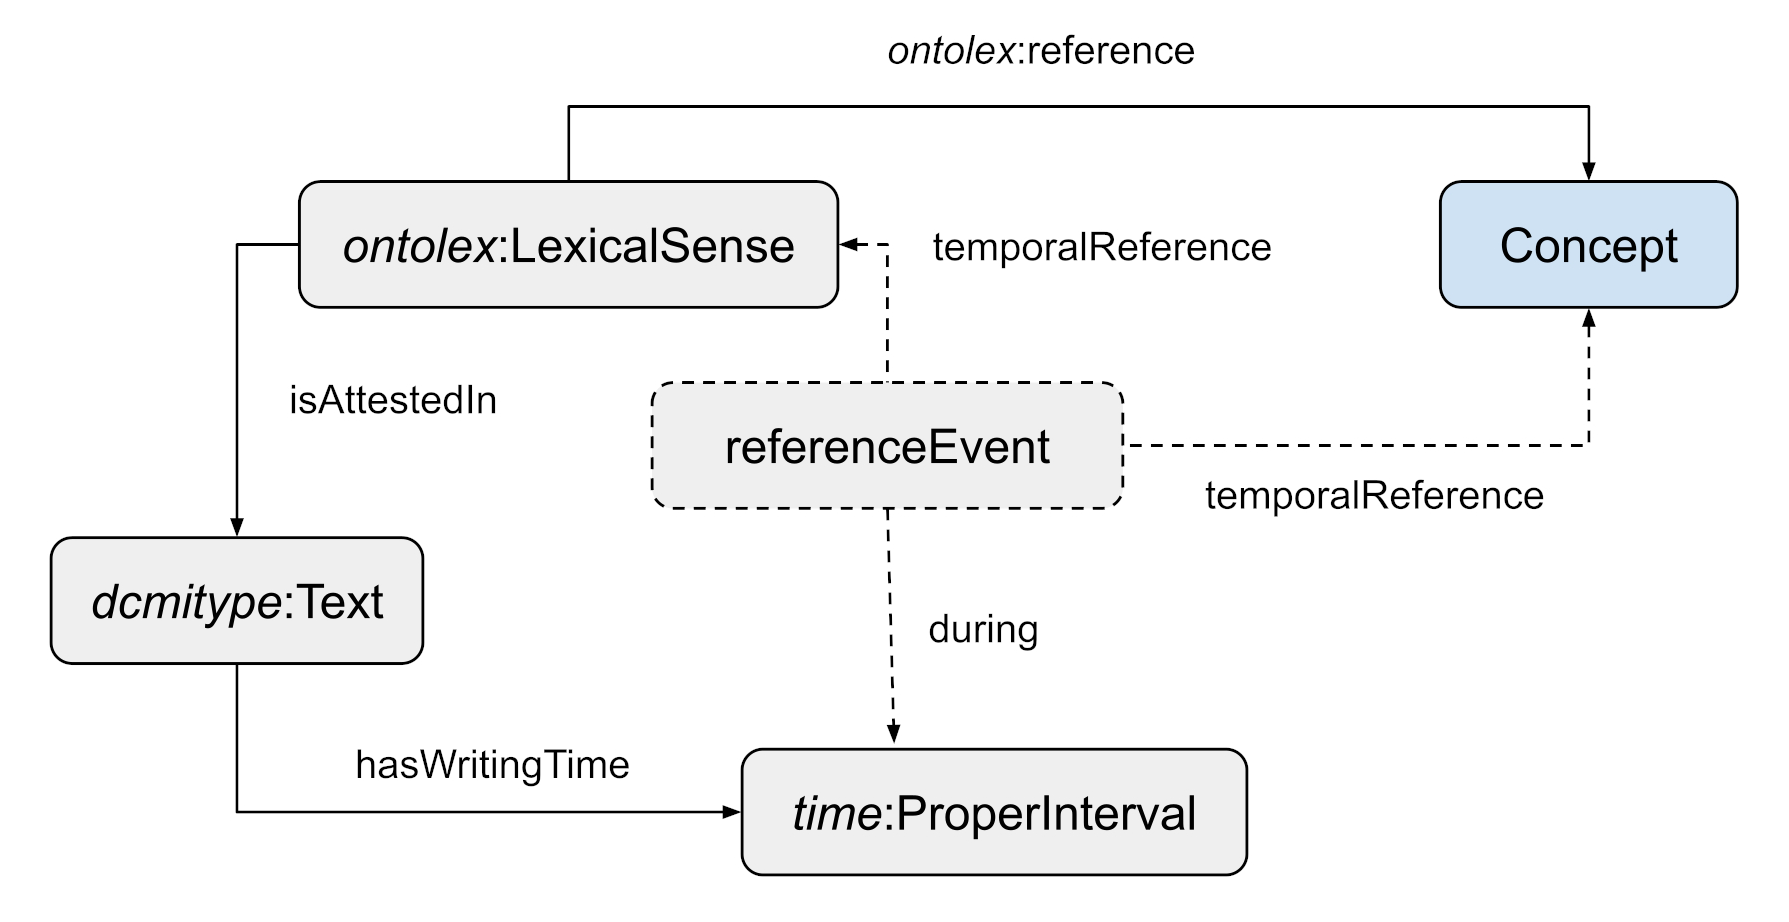 Flow chart beginning with the ReferenceEvent.